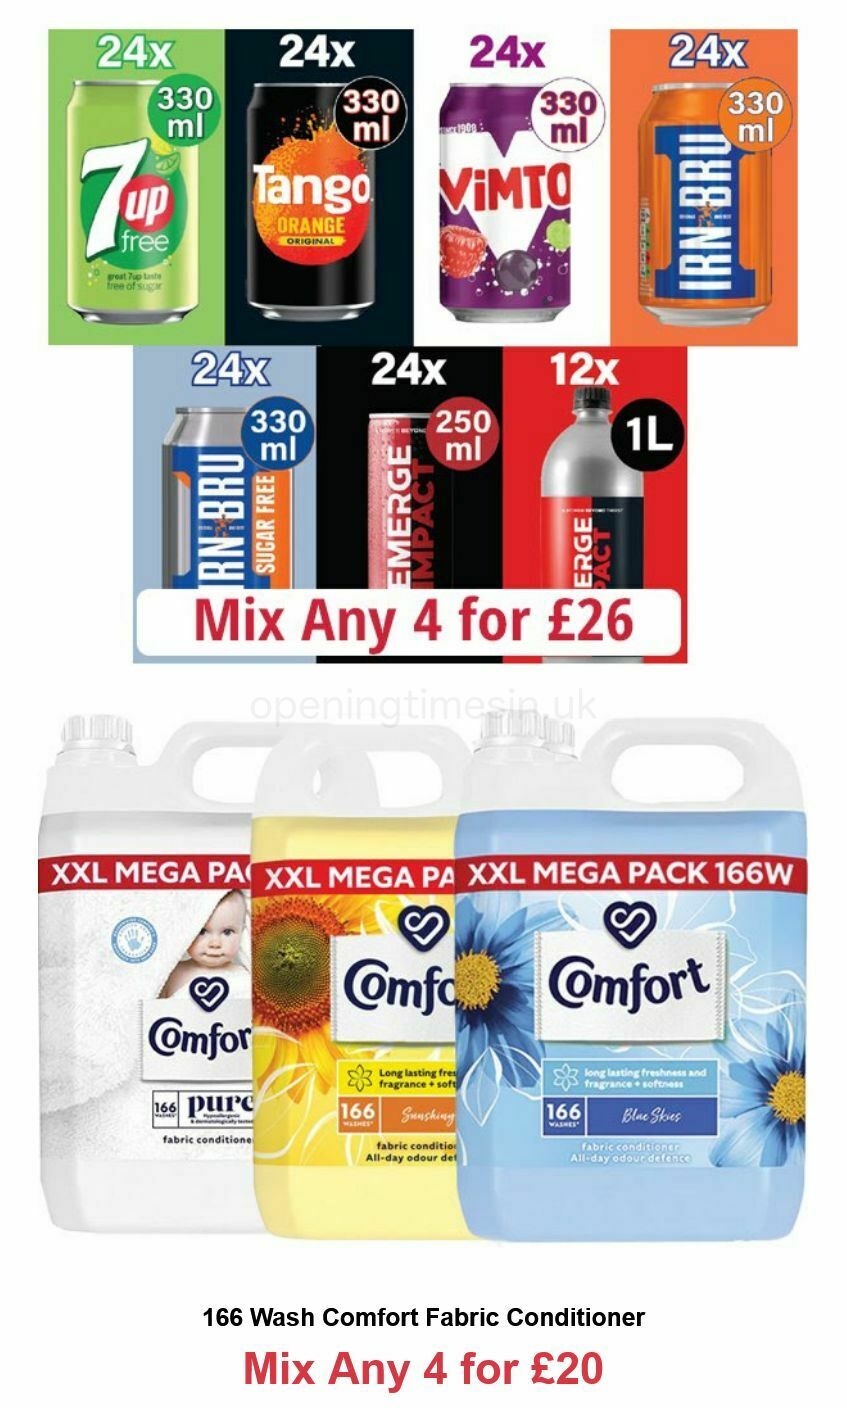 Farmfoods Offers from 2 August